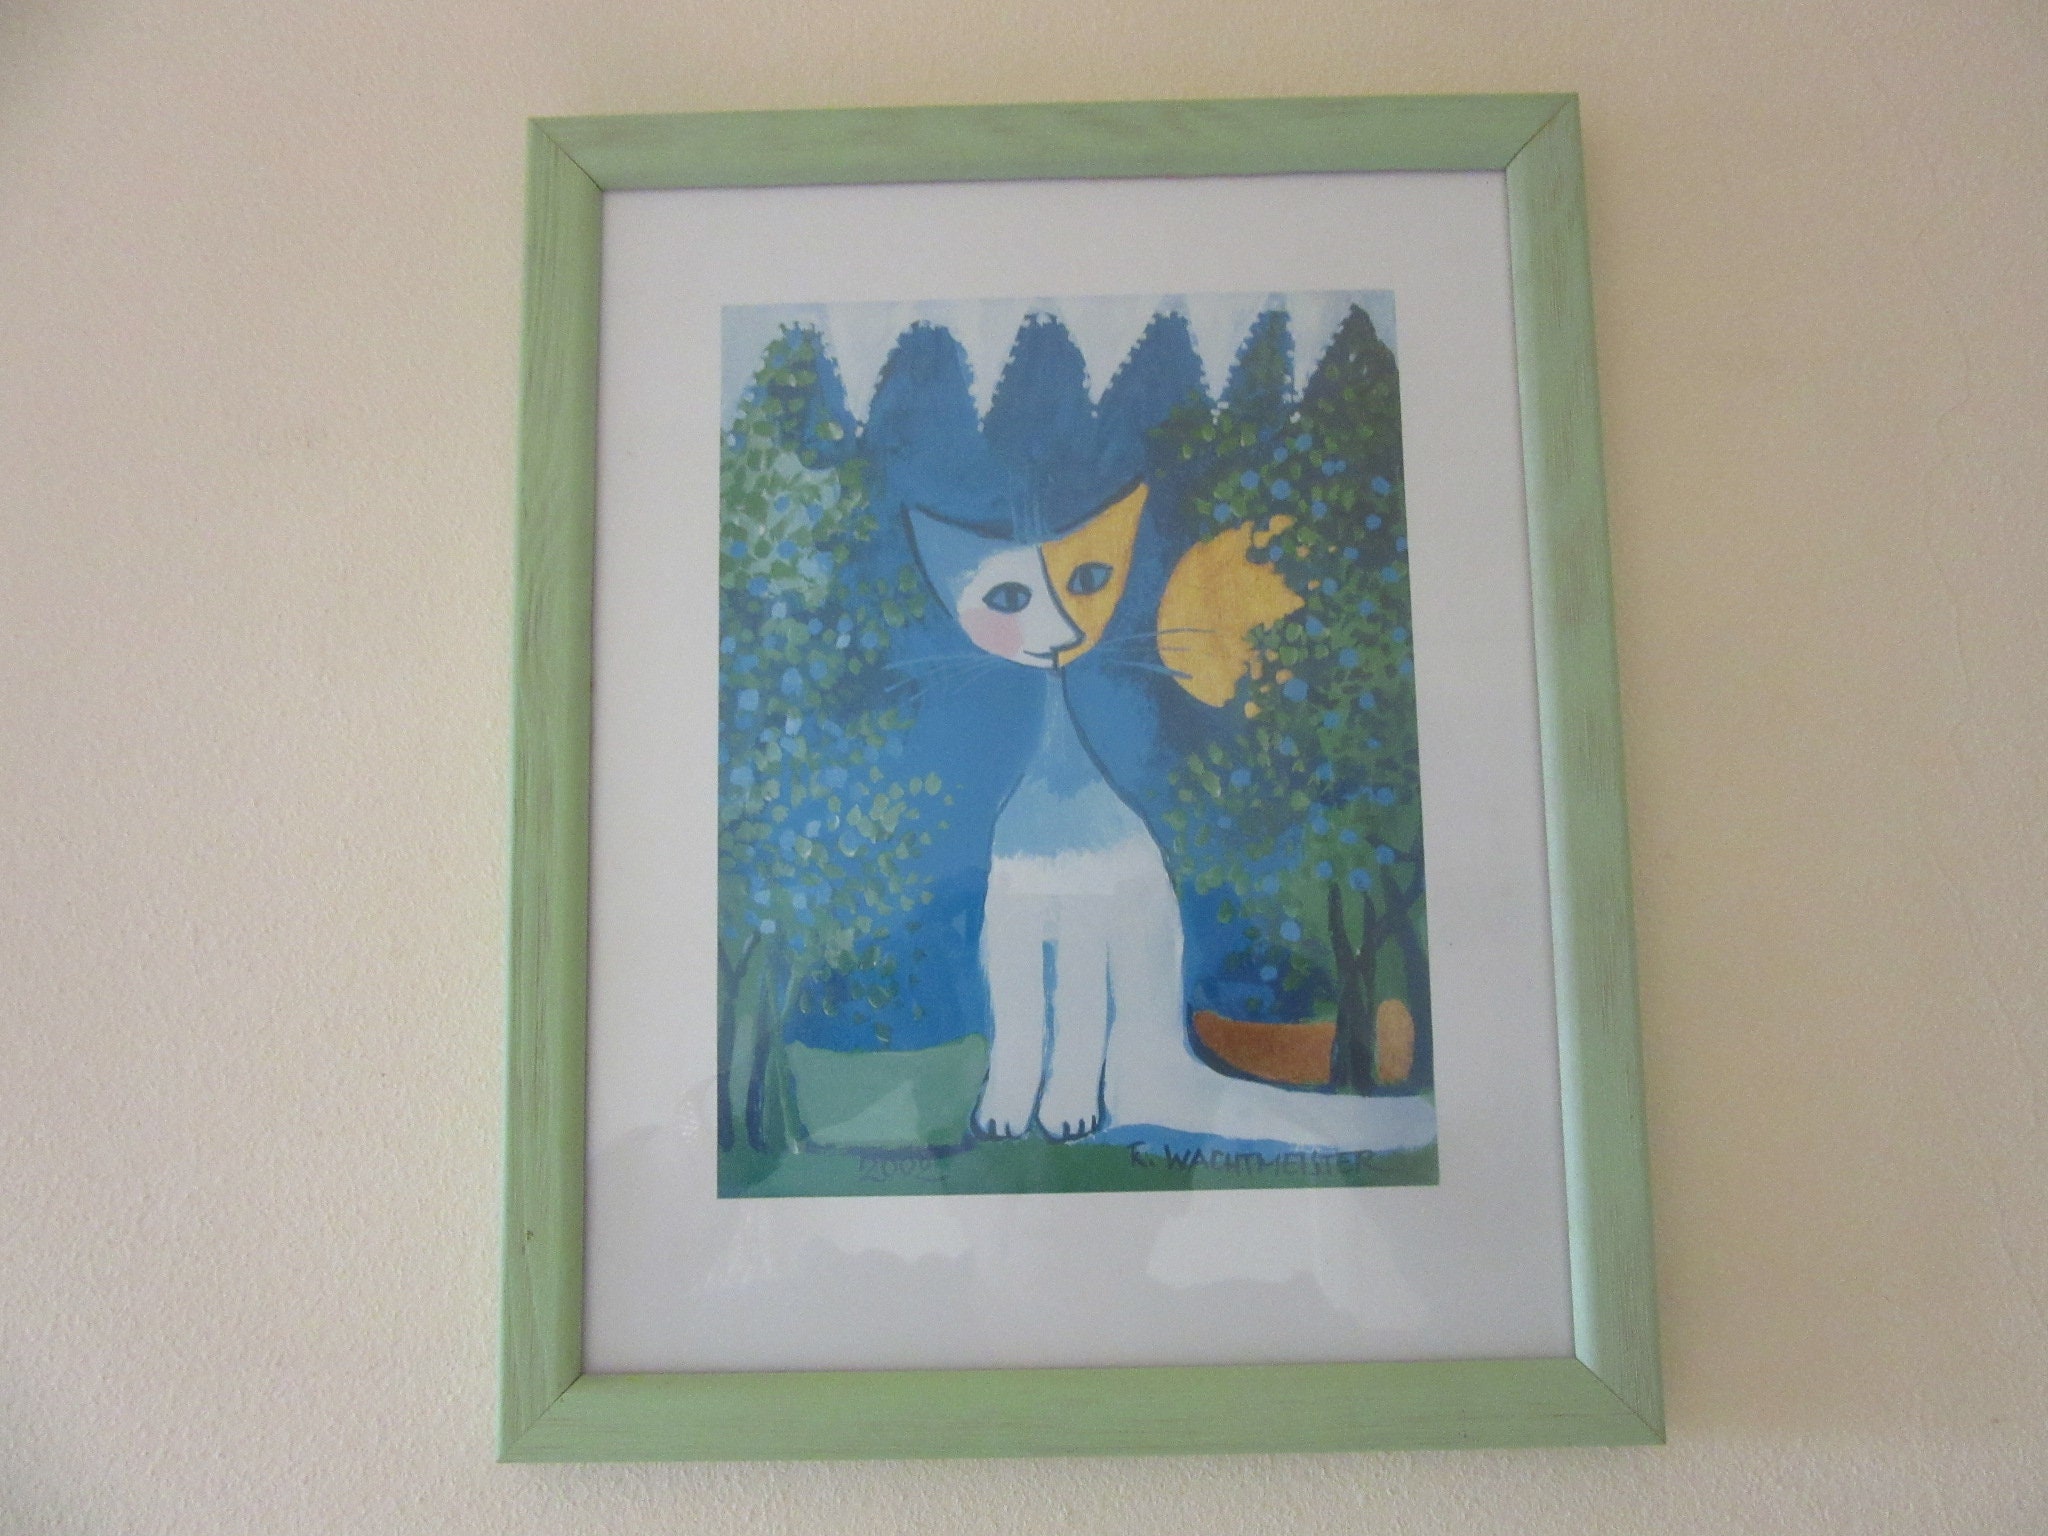 Rosina Wachtmeister Framed Print Cat, Very Decorative, Quite Rare, Ideal  Present , Vintage 